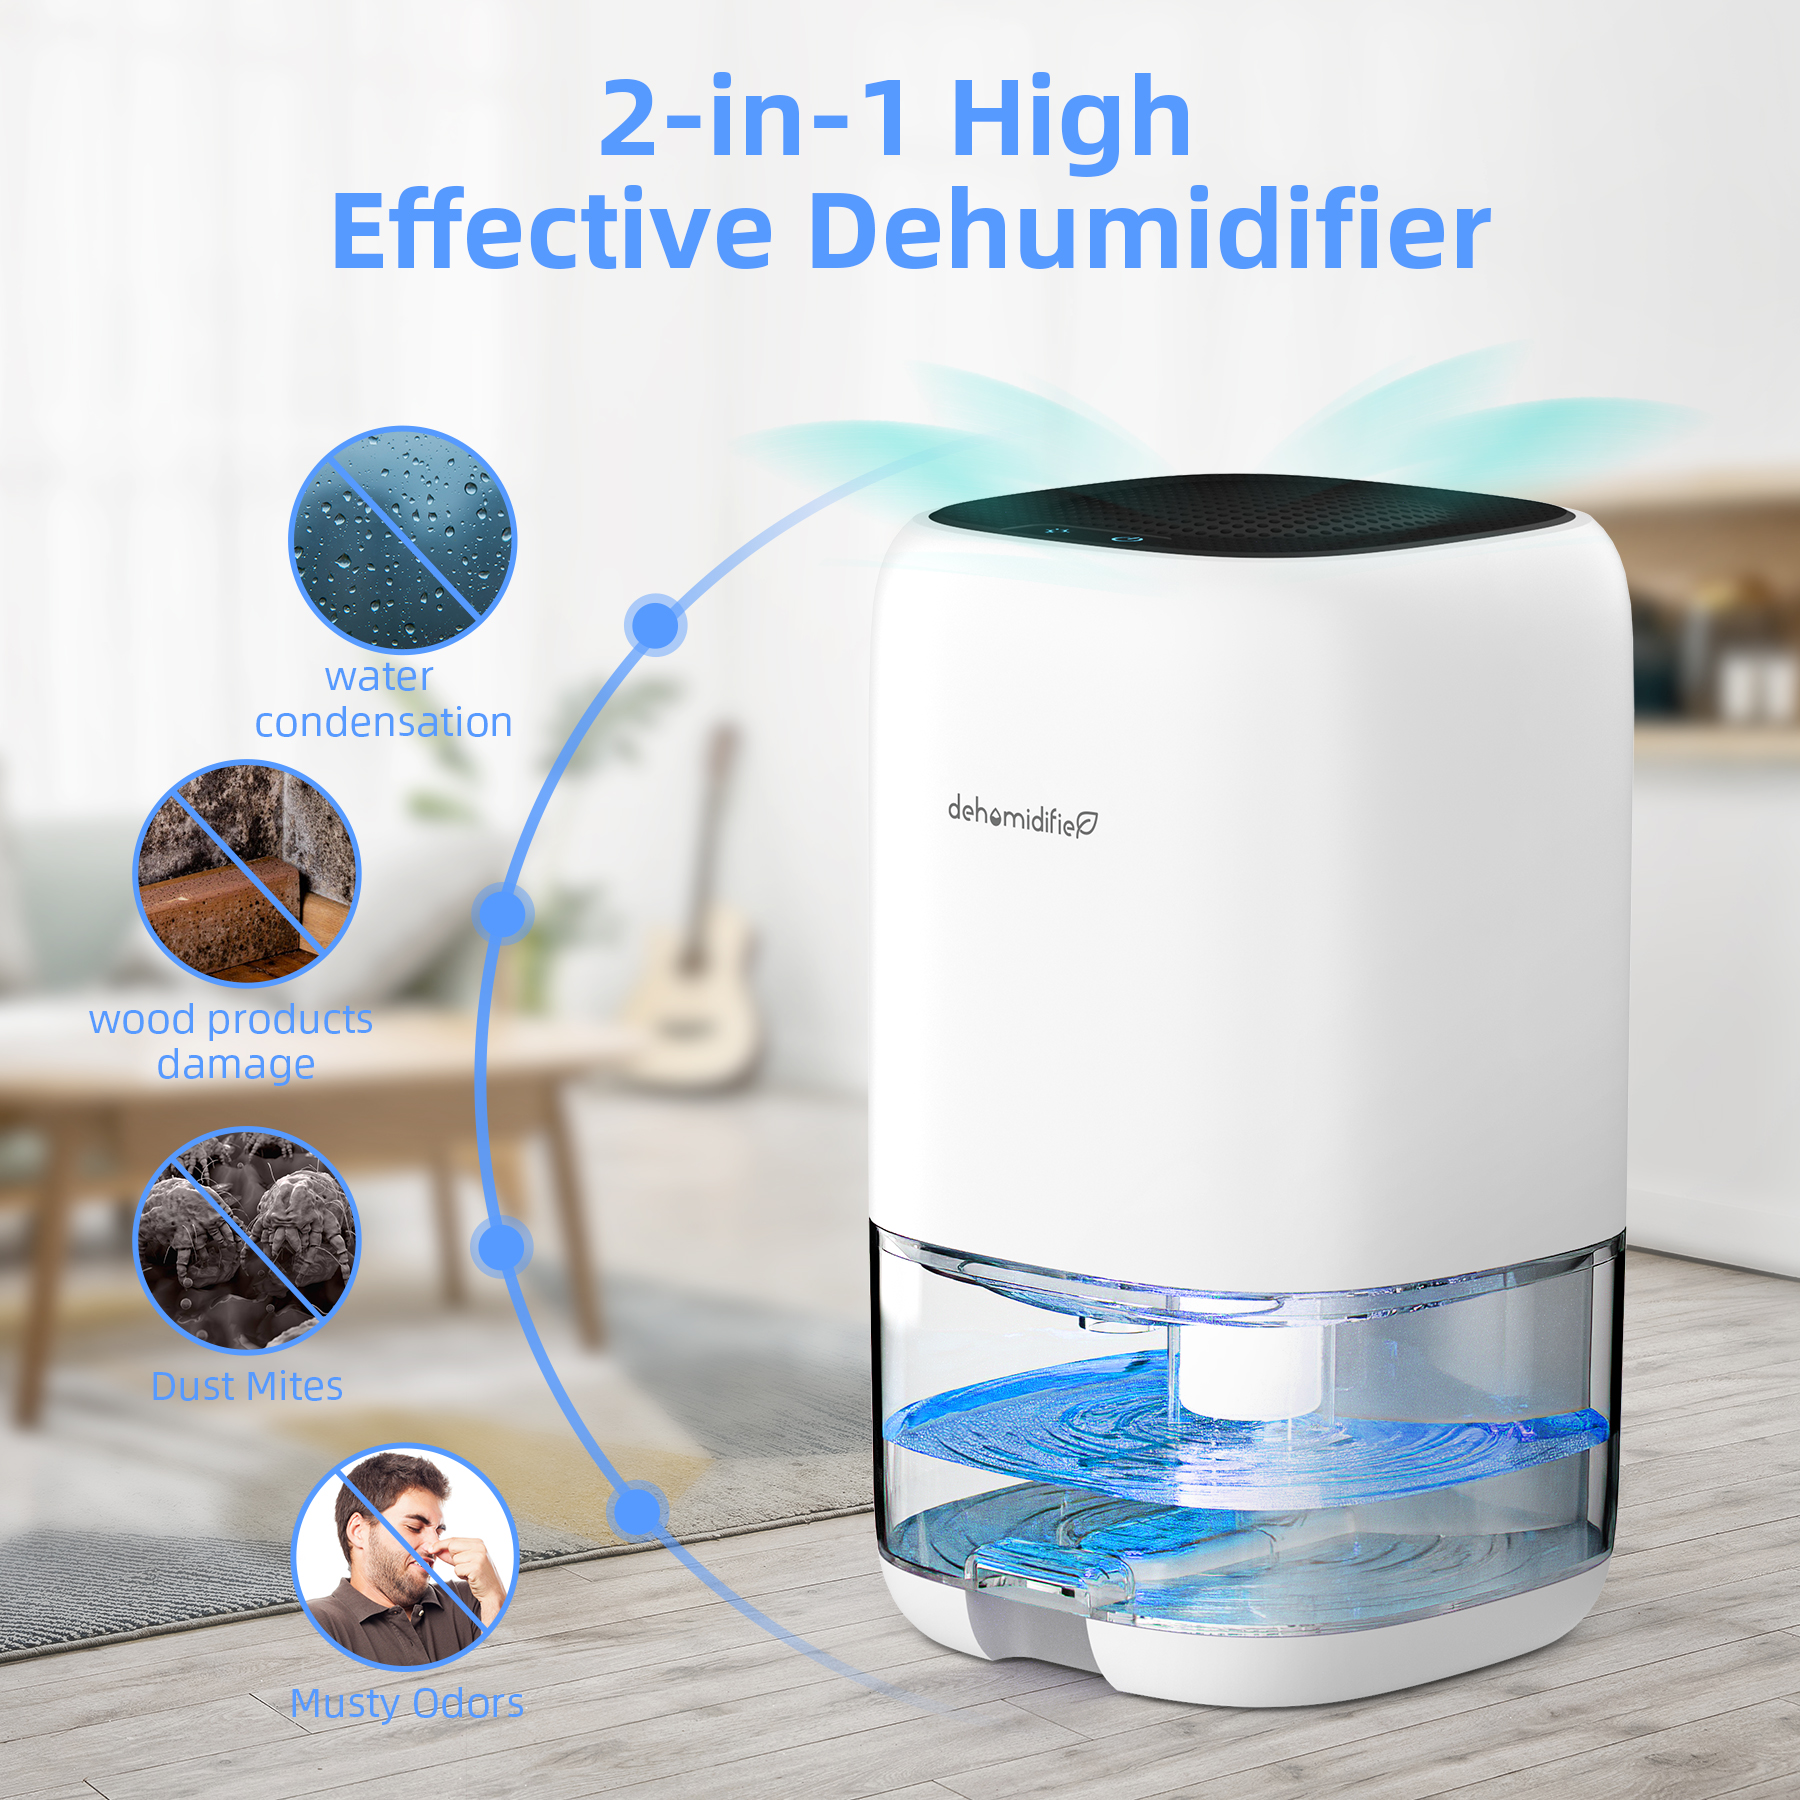 KLOUDIC Dehumidifier Portable and Ultra Quiet with Automatic Defrosting for Home 1000ML(2200 Cubic Feet) - image 5 of 8